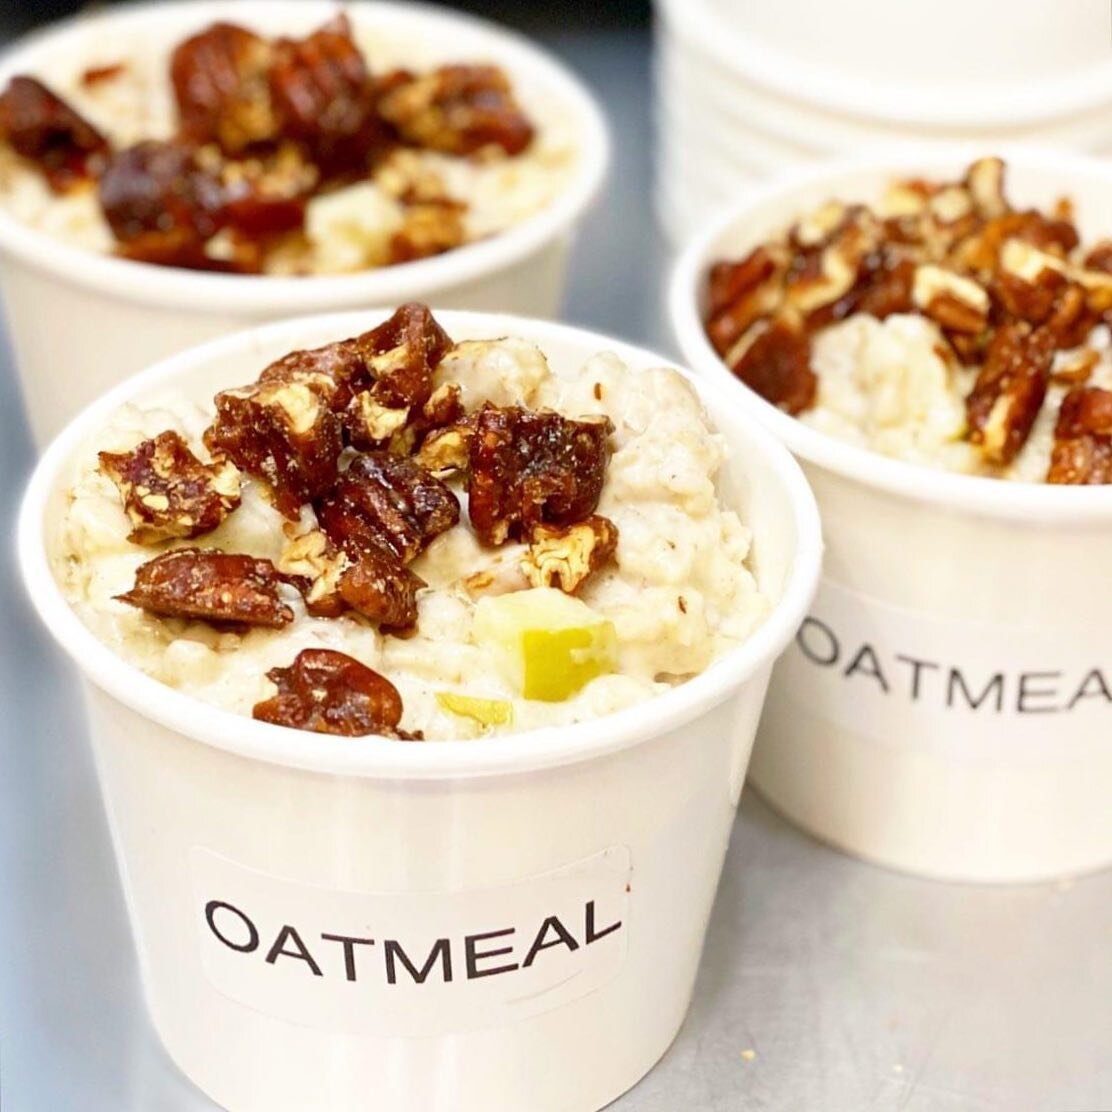 Warm Cinnamon Apple Candied Pecan Oatmeal cups are available at Reeder&rsquo;s! Start your day off great! ☀️ 

#breakfast #reeders #tulsa #local #freshtoconvenience #gasstationfood #morning #wednesday #greatday #best #eatlocal #918food #tulsapeople #